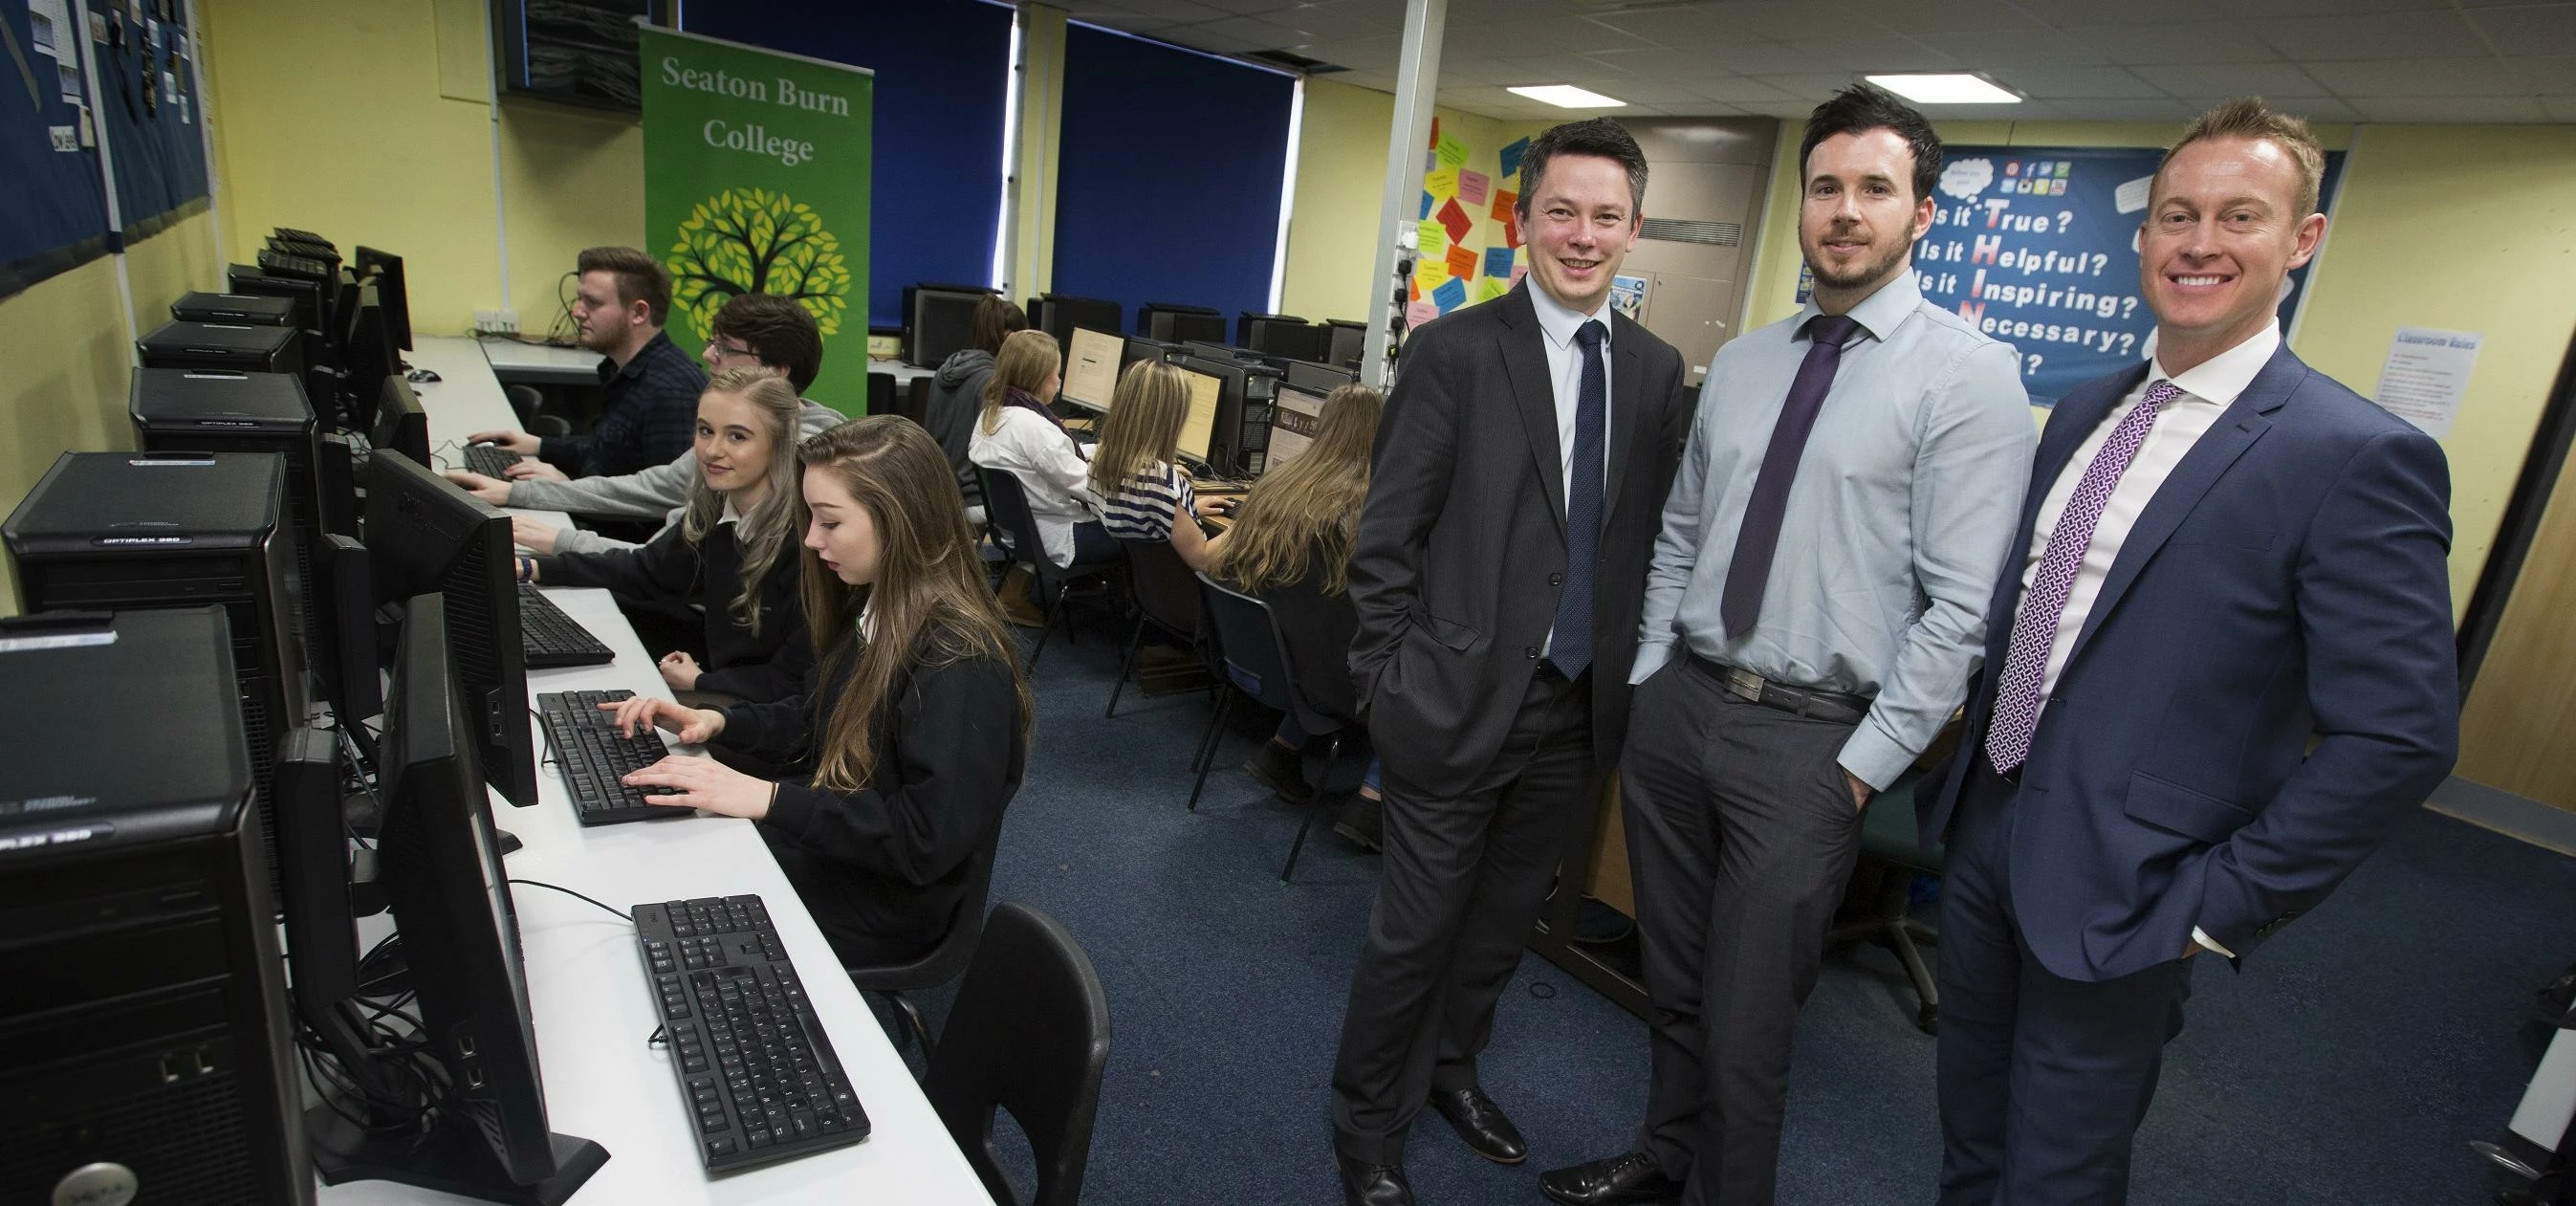 Dan Pace, head of ICT at Seaton Burn College, Chris Nellist, information and administration manager 